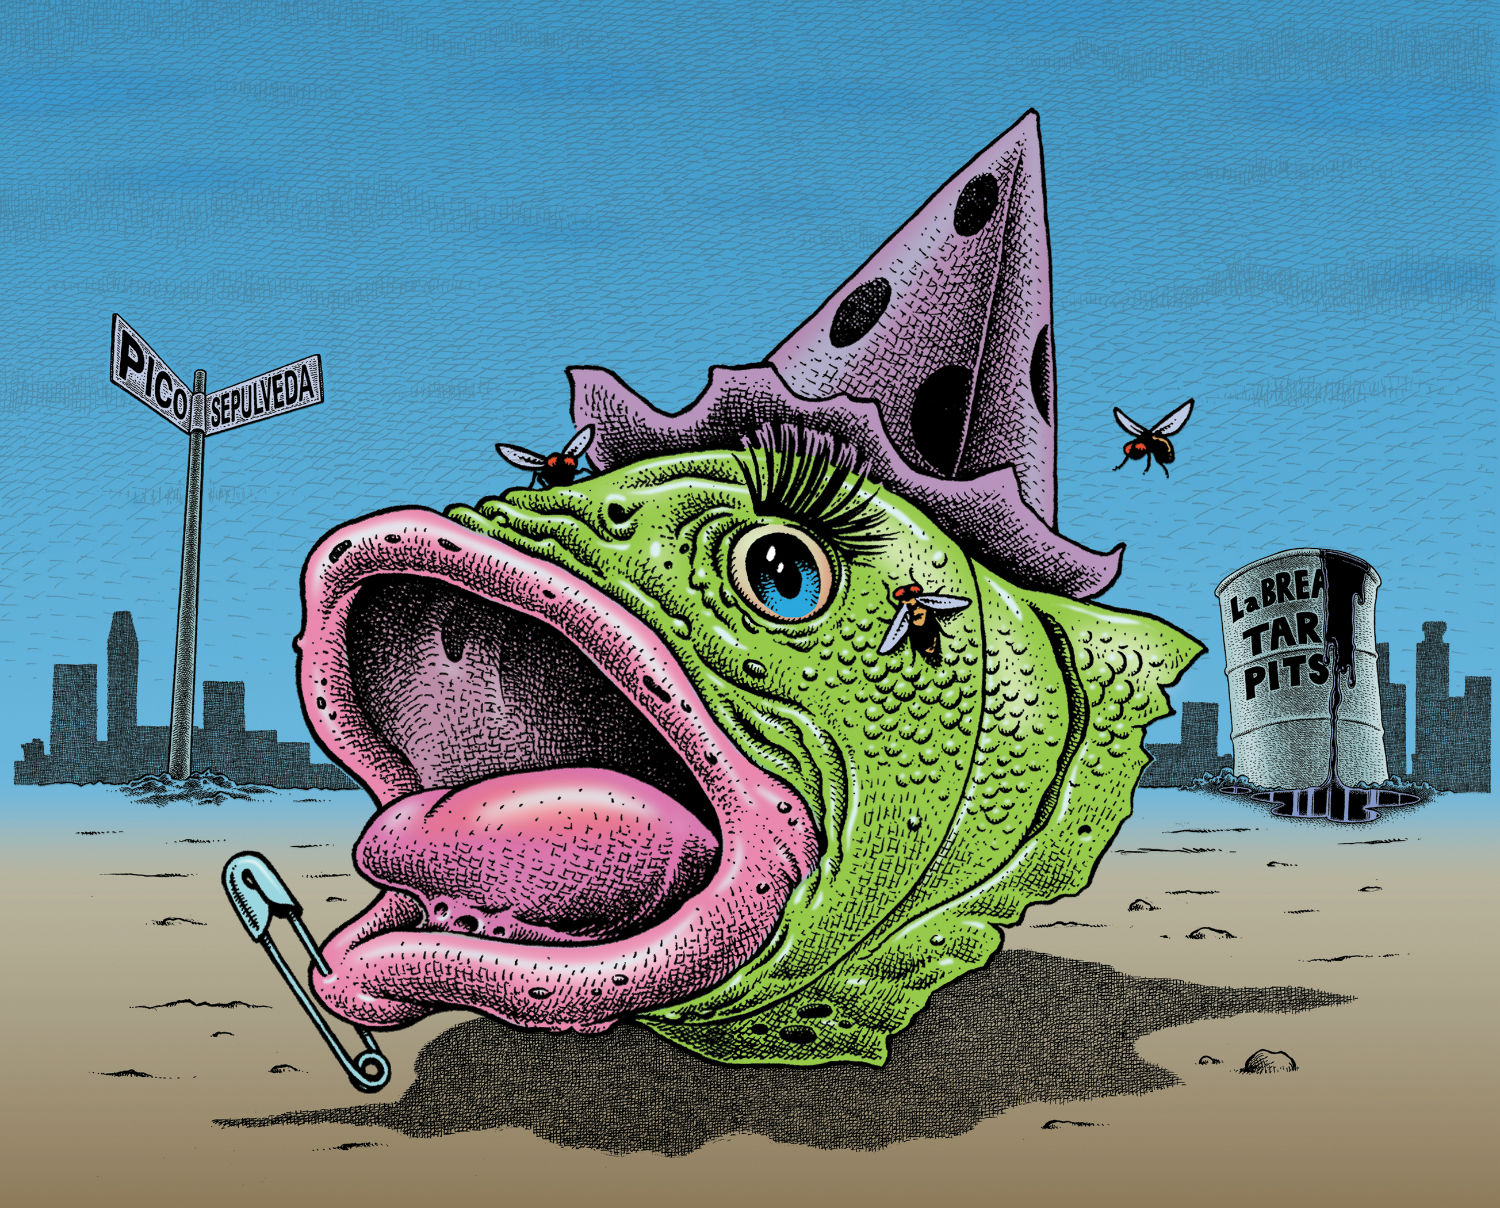 Fish Head/Covered in Punk back cover art  illustrated by Stephen Blickenstaff. © 2018 Caf Muzeck, LLC. All Rights Reserved